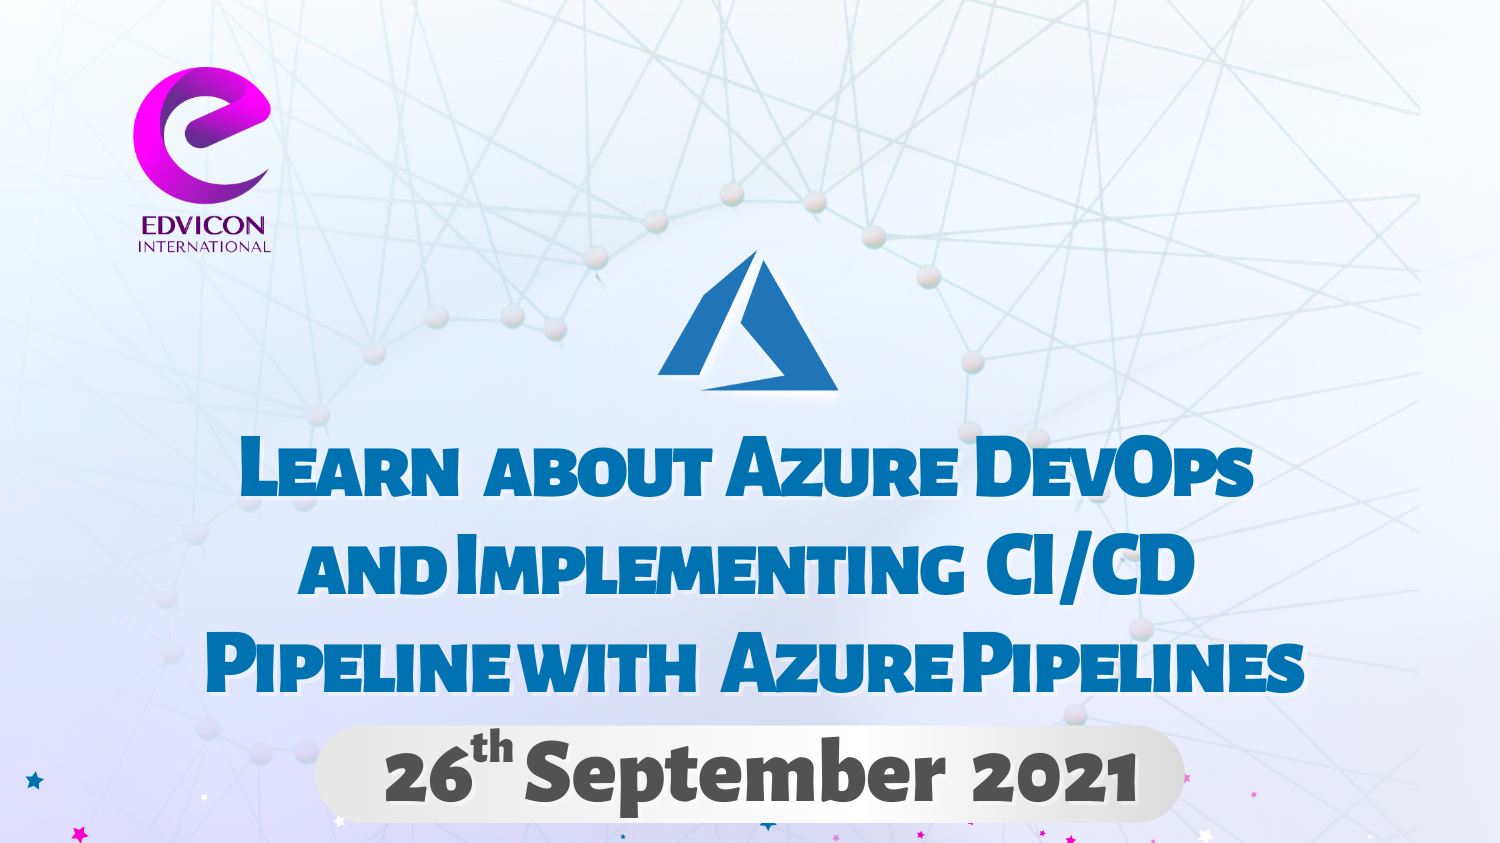 Introduction to Azure DevOps and Implementing CI / CD Pipeline with Azure Pipelines